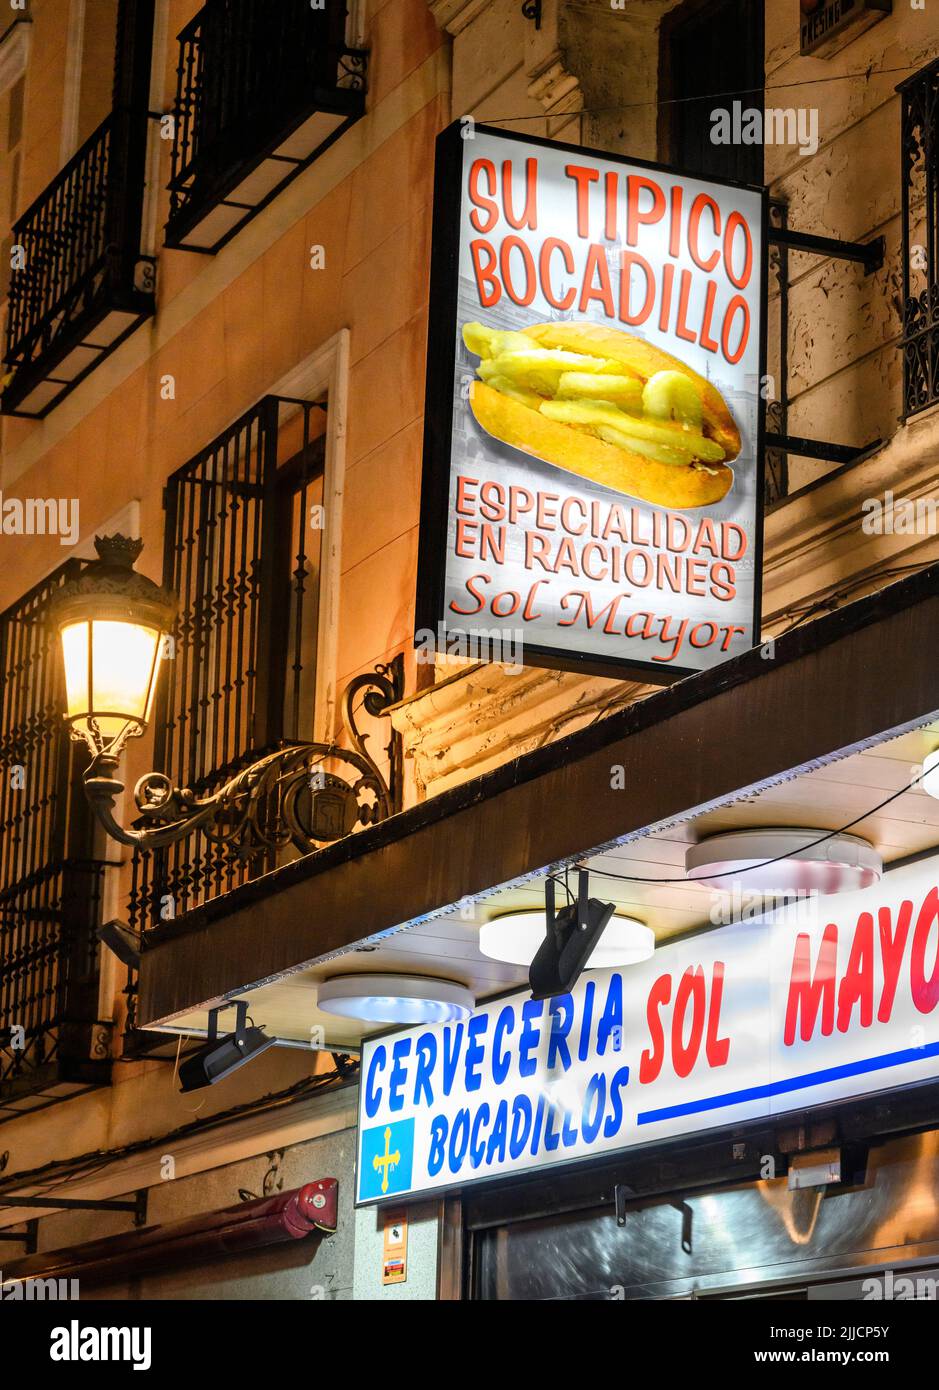 The cerveceria Sol Mayor, specialising in Calamares bocadillos, fried squid in rolls,  near the Puerta del Sol, in the center of Madrid. Spain Stock Photo